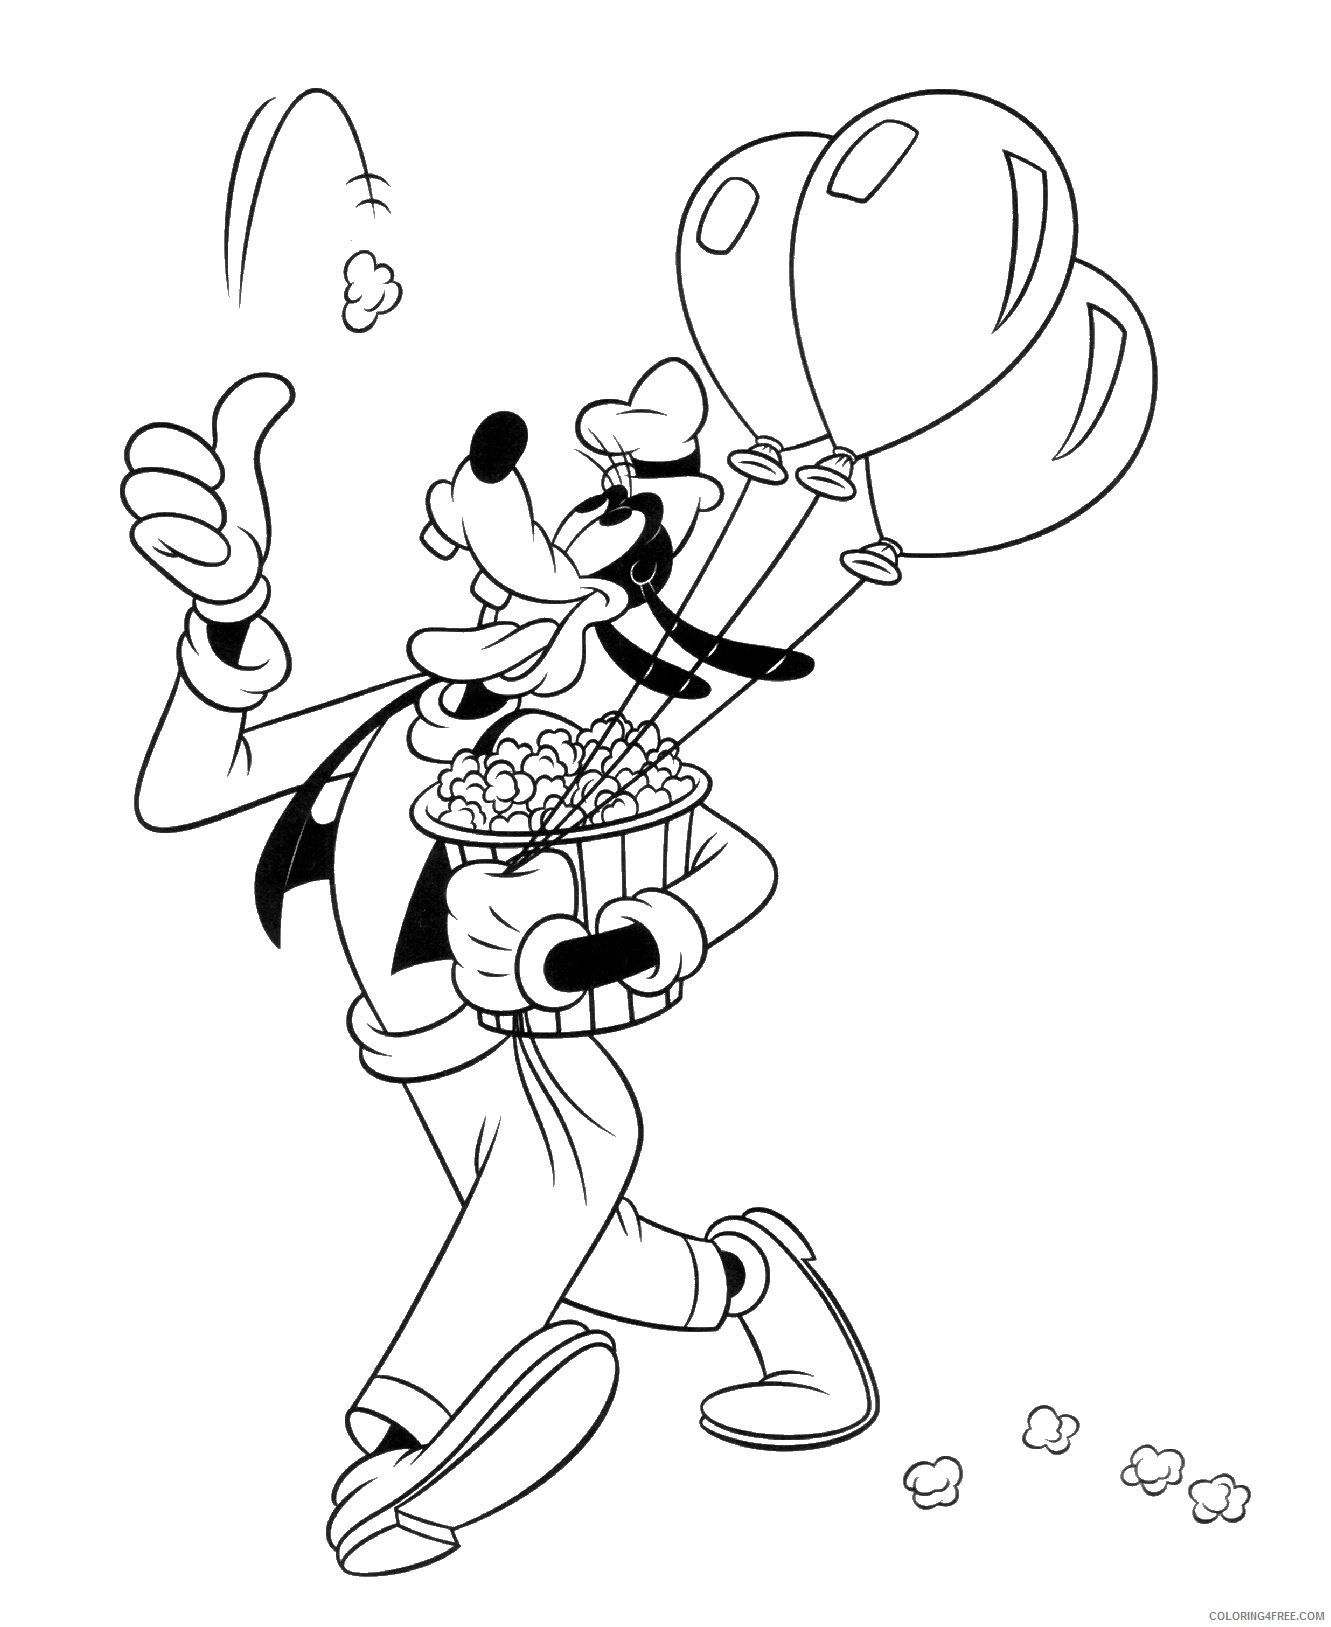 Goofy Coloring Pages Cartoons Goofy Pictures to Print Printable 2020 3039 Coloring4free